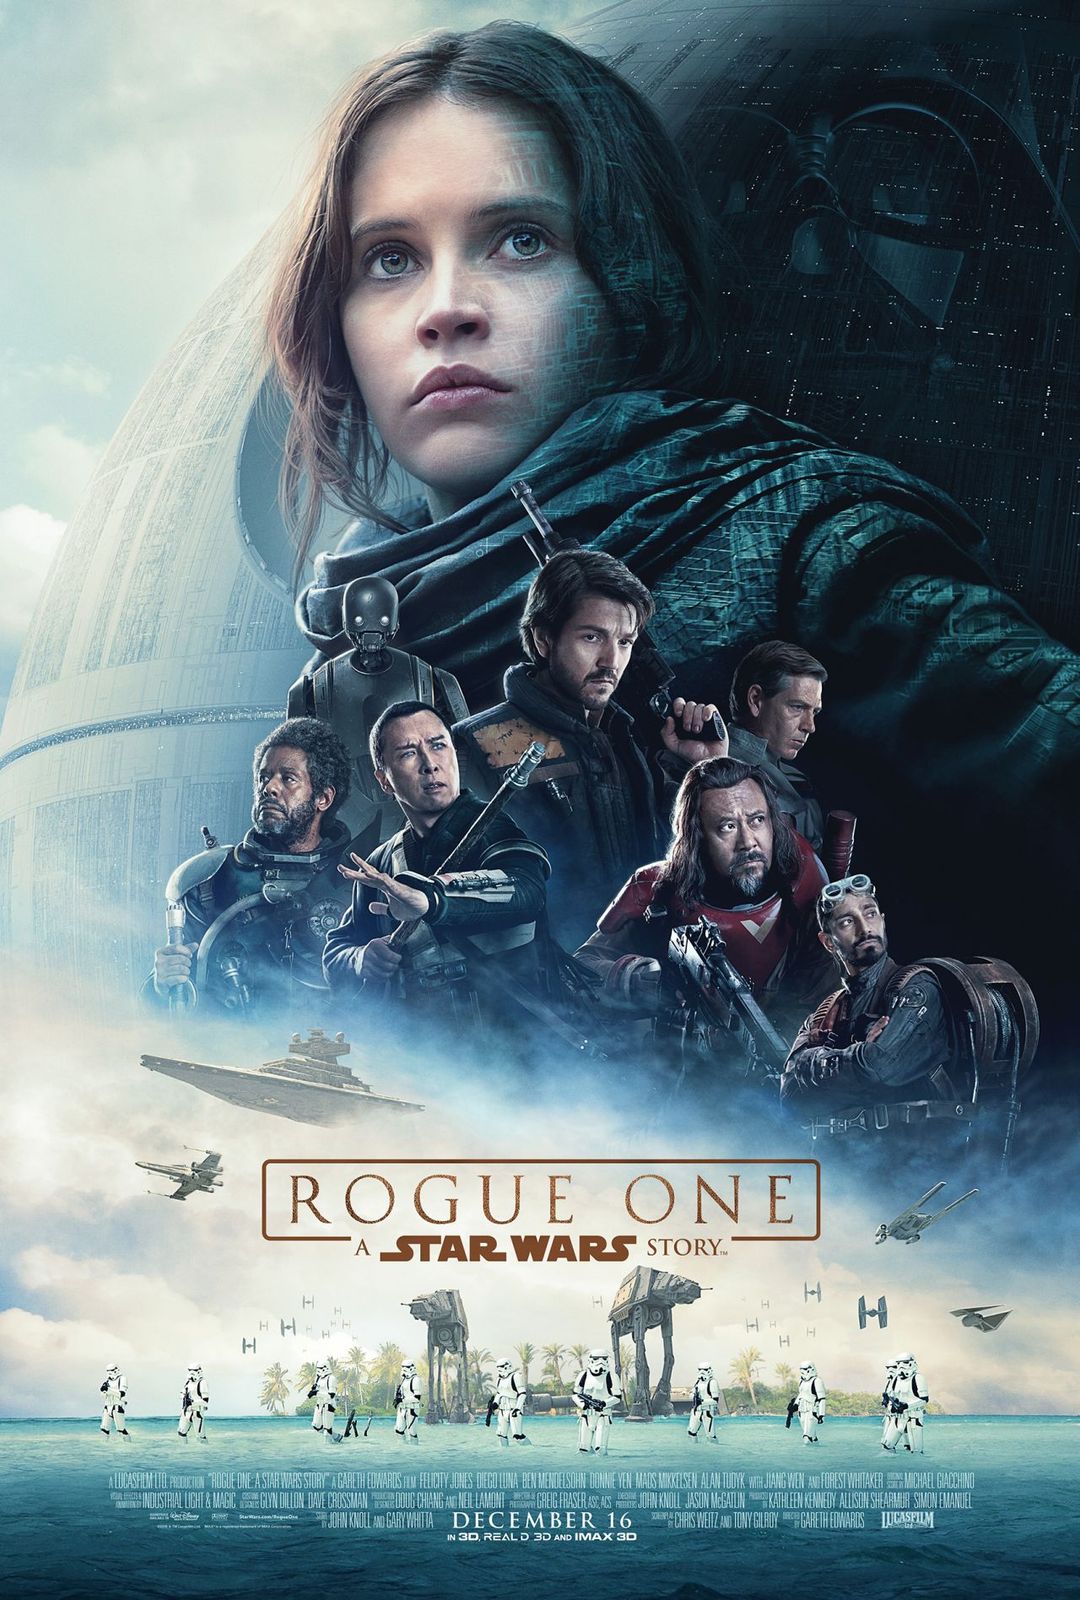 Rogue One: A Star Wars Story Poster Revealed, Trailer Coming Soon